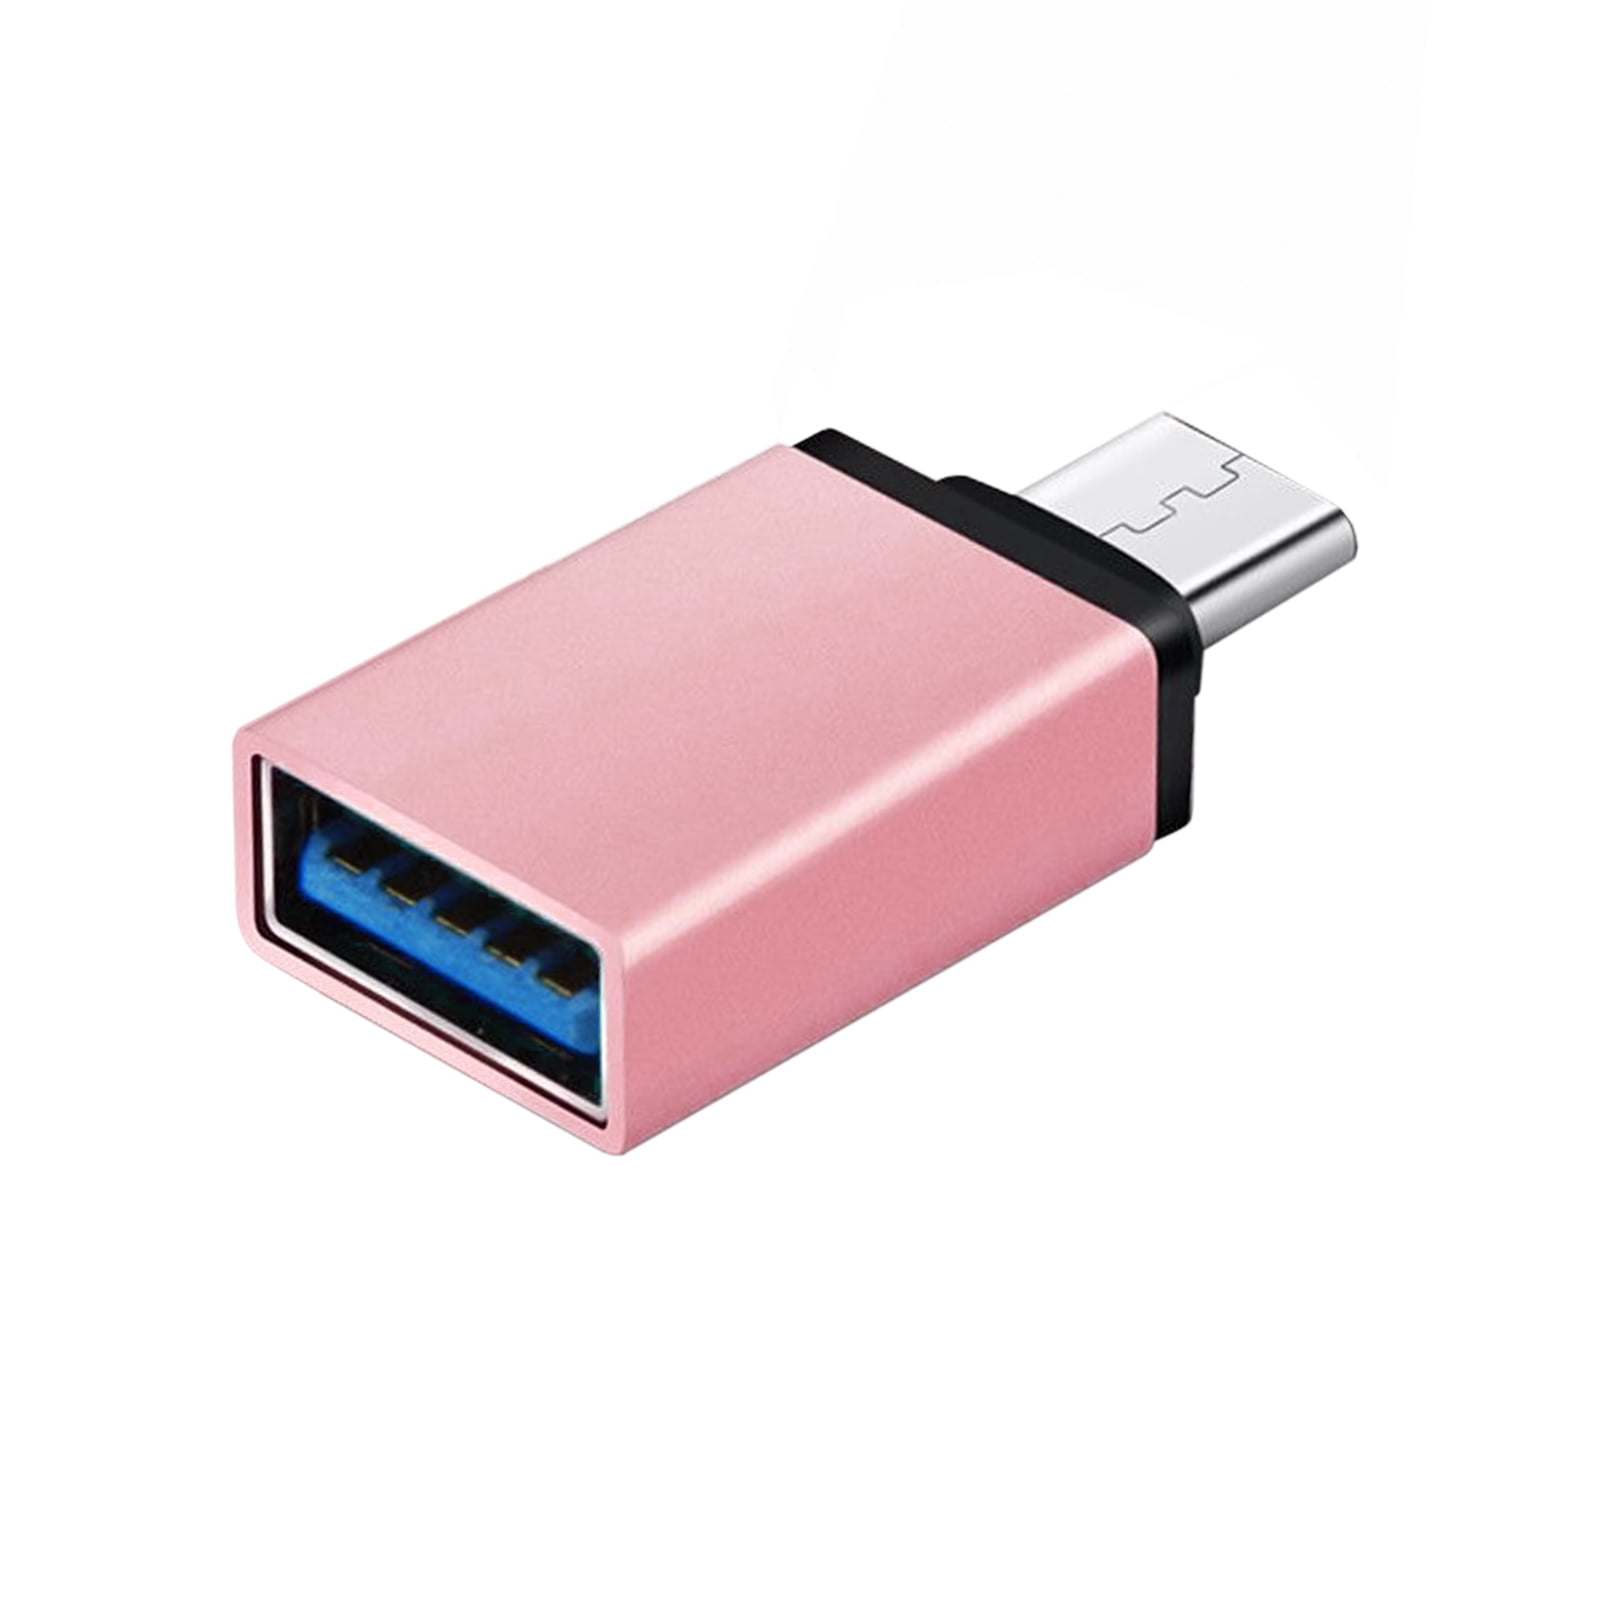 Type C to USB OTG Adapter USB-C Male to USB 3.0 Female Adapter Charger ...